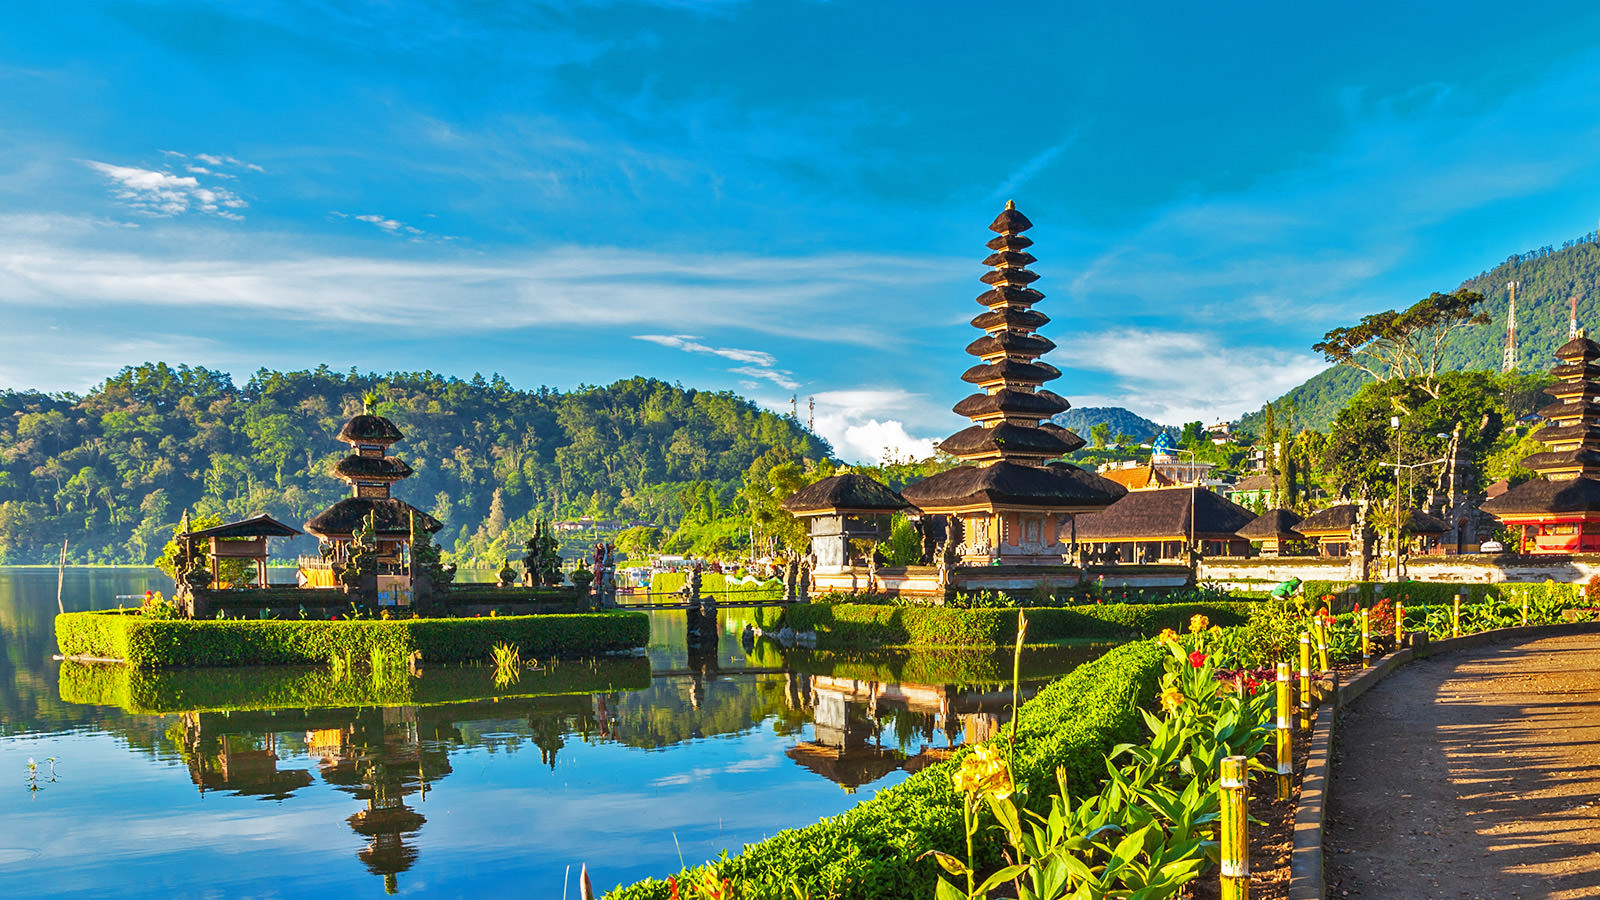 Get Trained In The Most Promising Settings: The Yoga Teacher Training Program In Bali